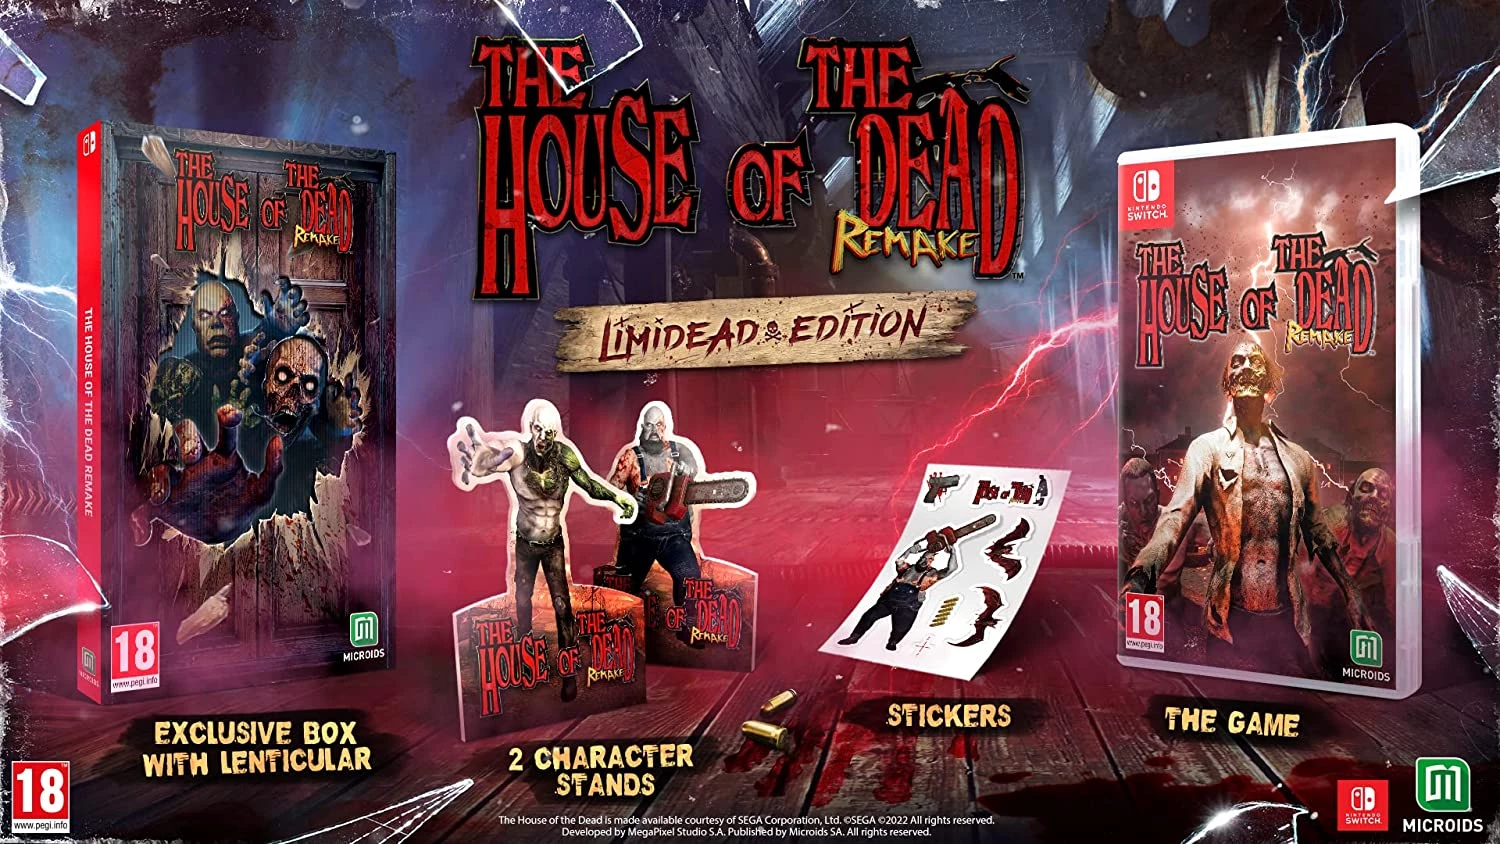 The House of the Dead Remake: Limidead Edition